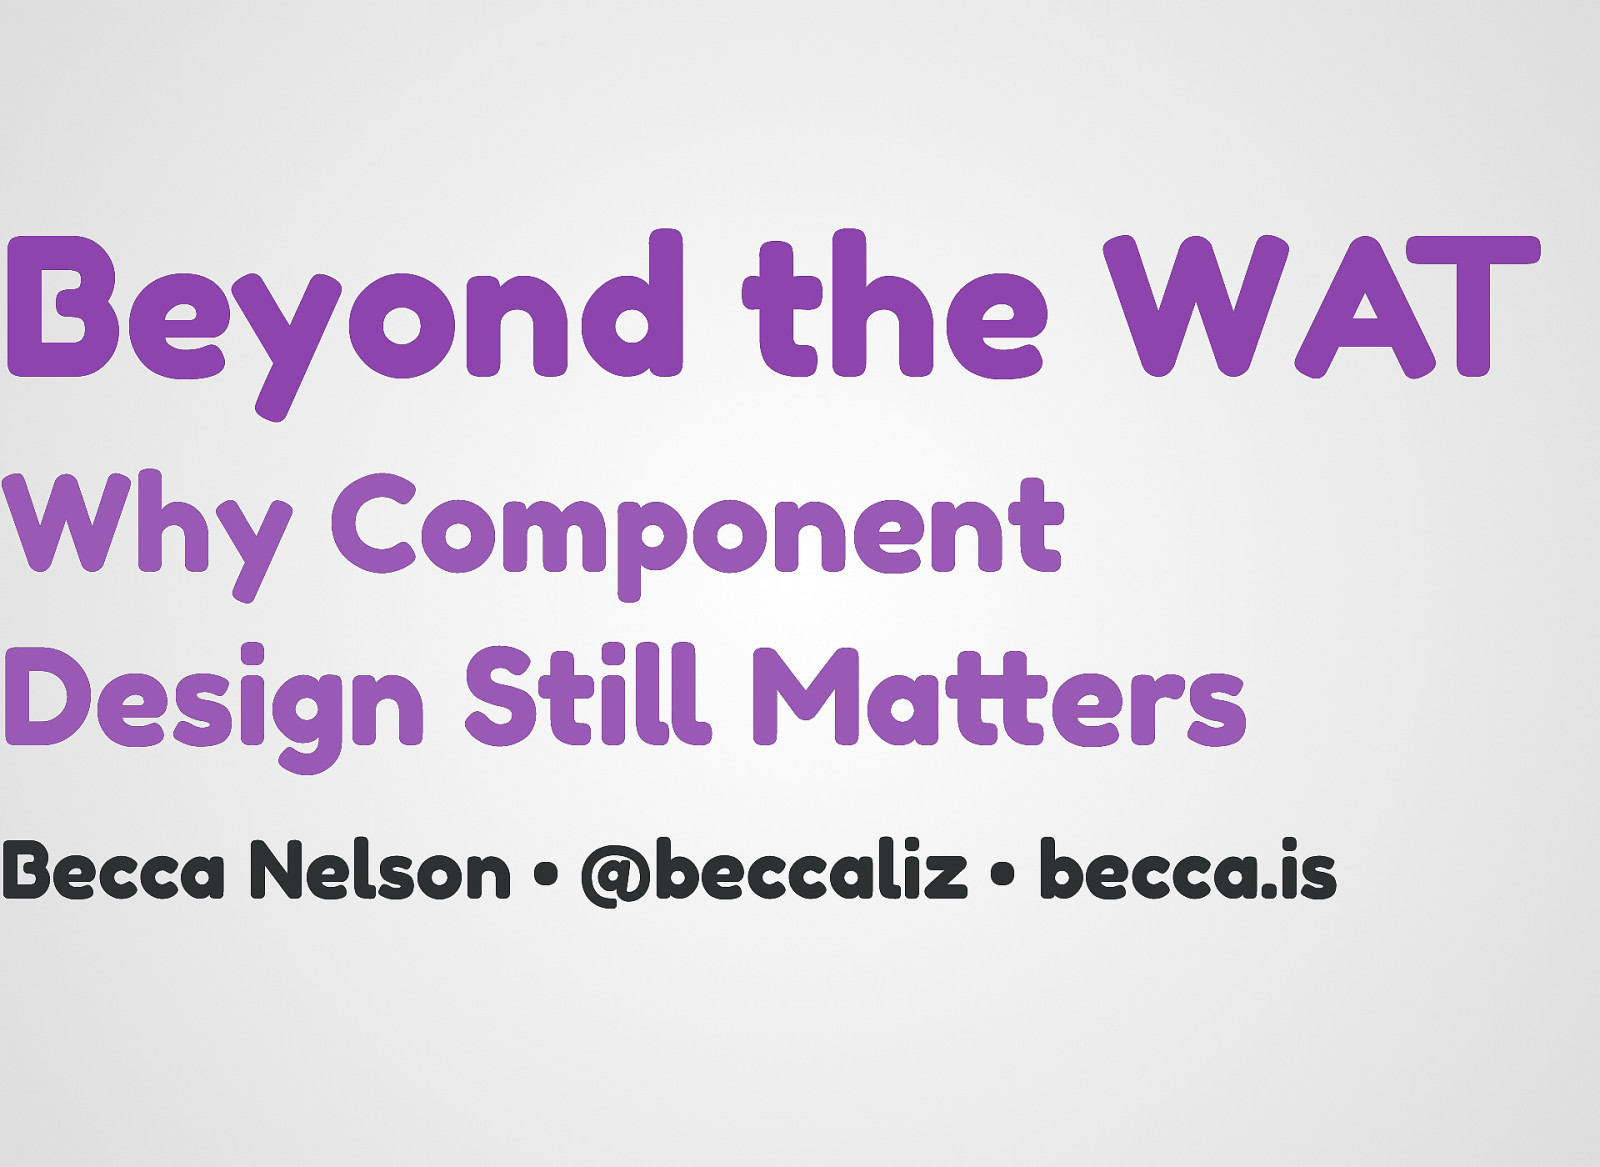 Beyond the WAT: Why Component Design Still Matters